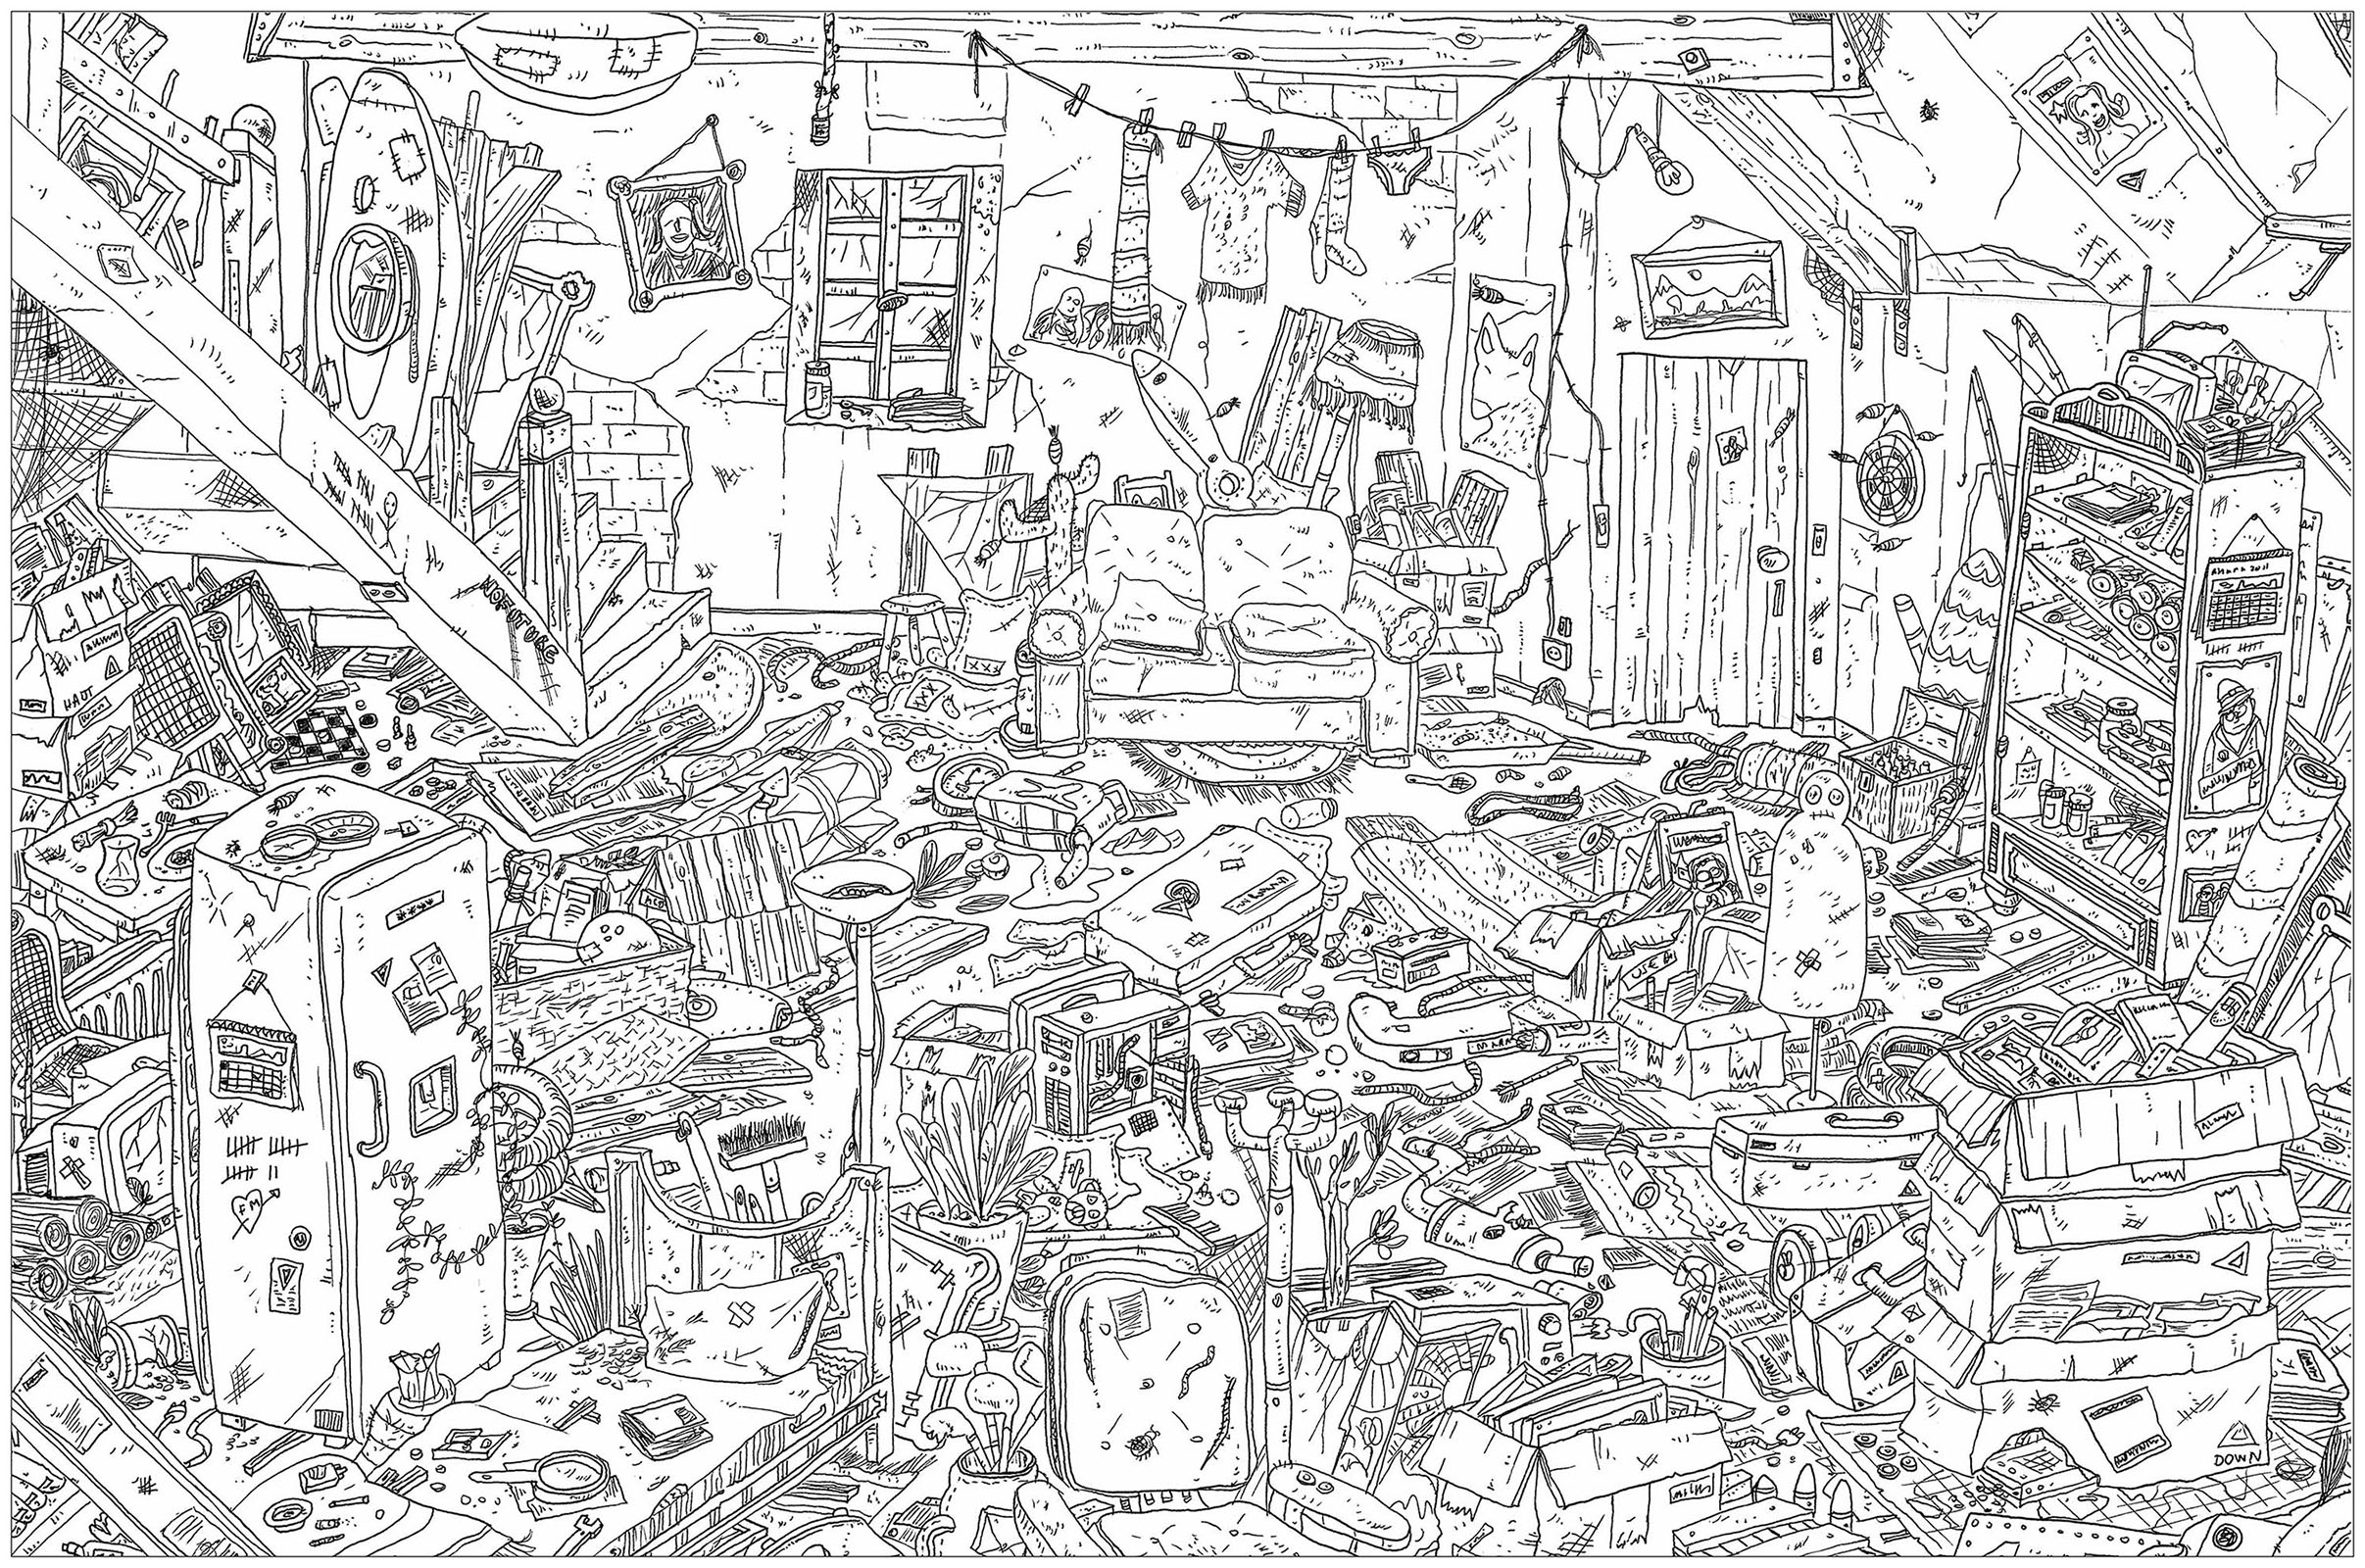 'Attic', a complex coloring page, 'Where is Waldo ?' style, Artist : Frédéric Brogard